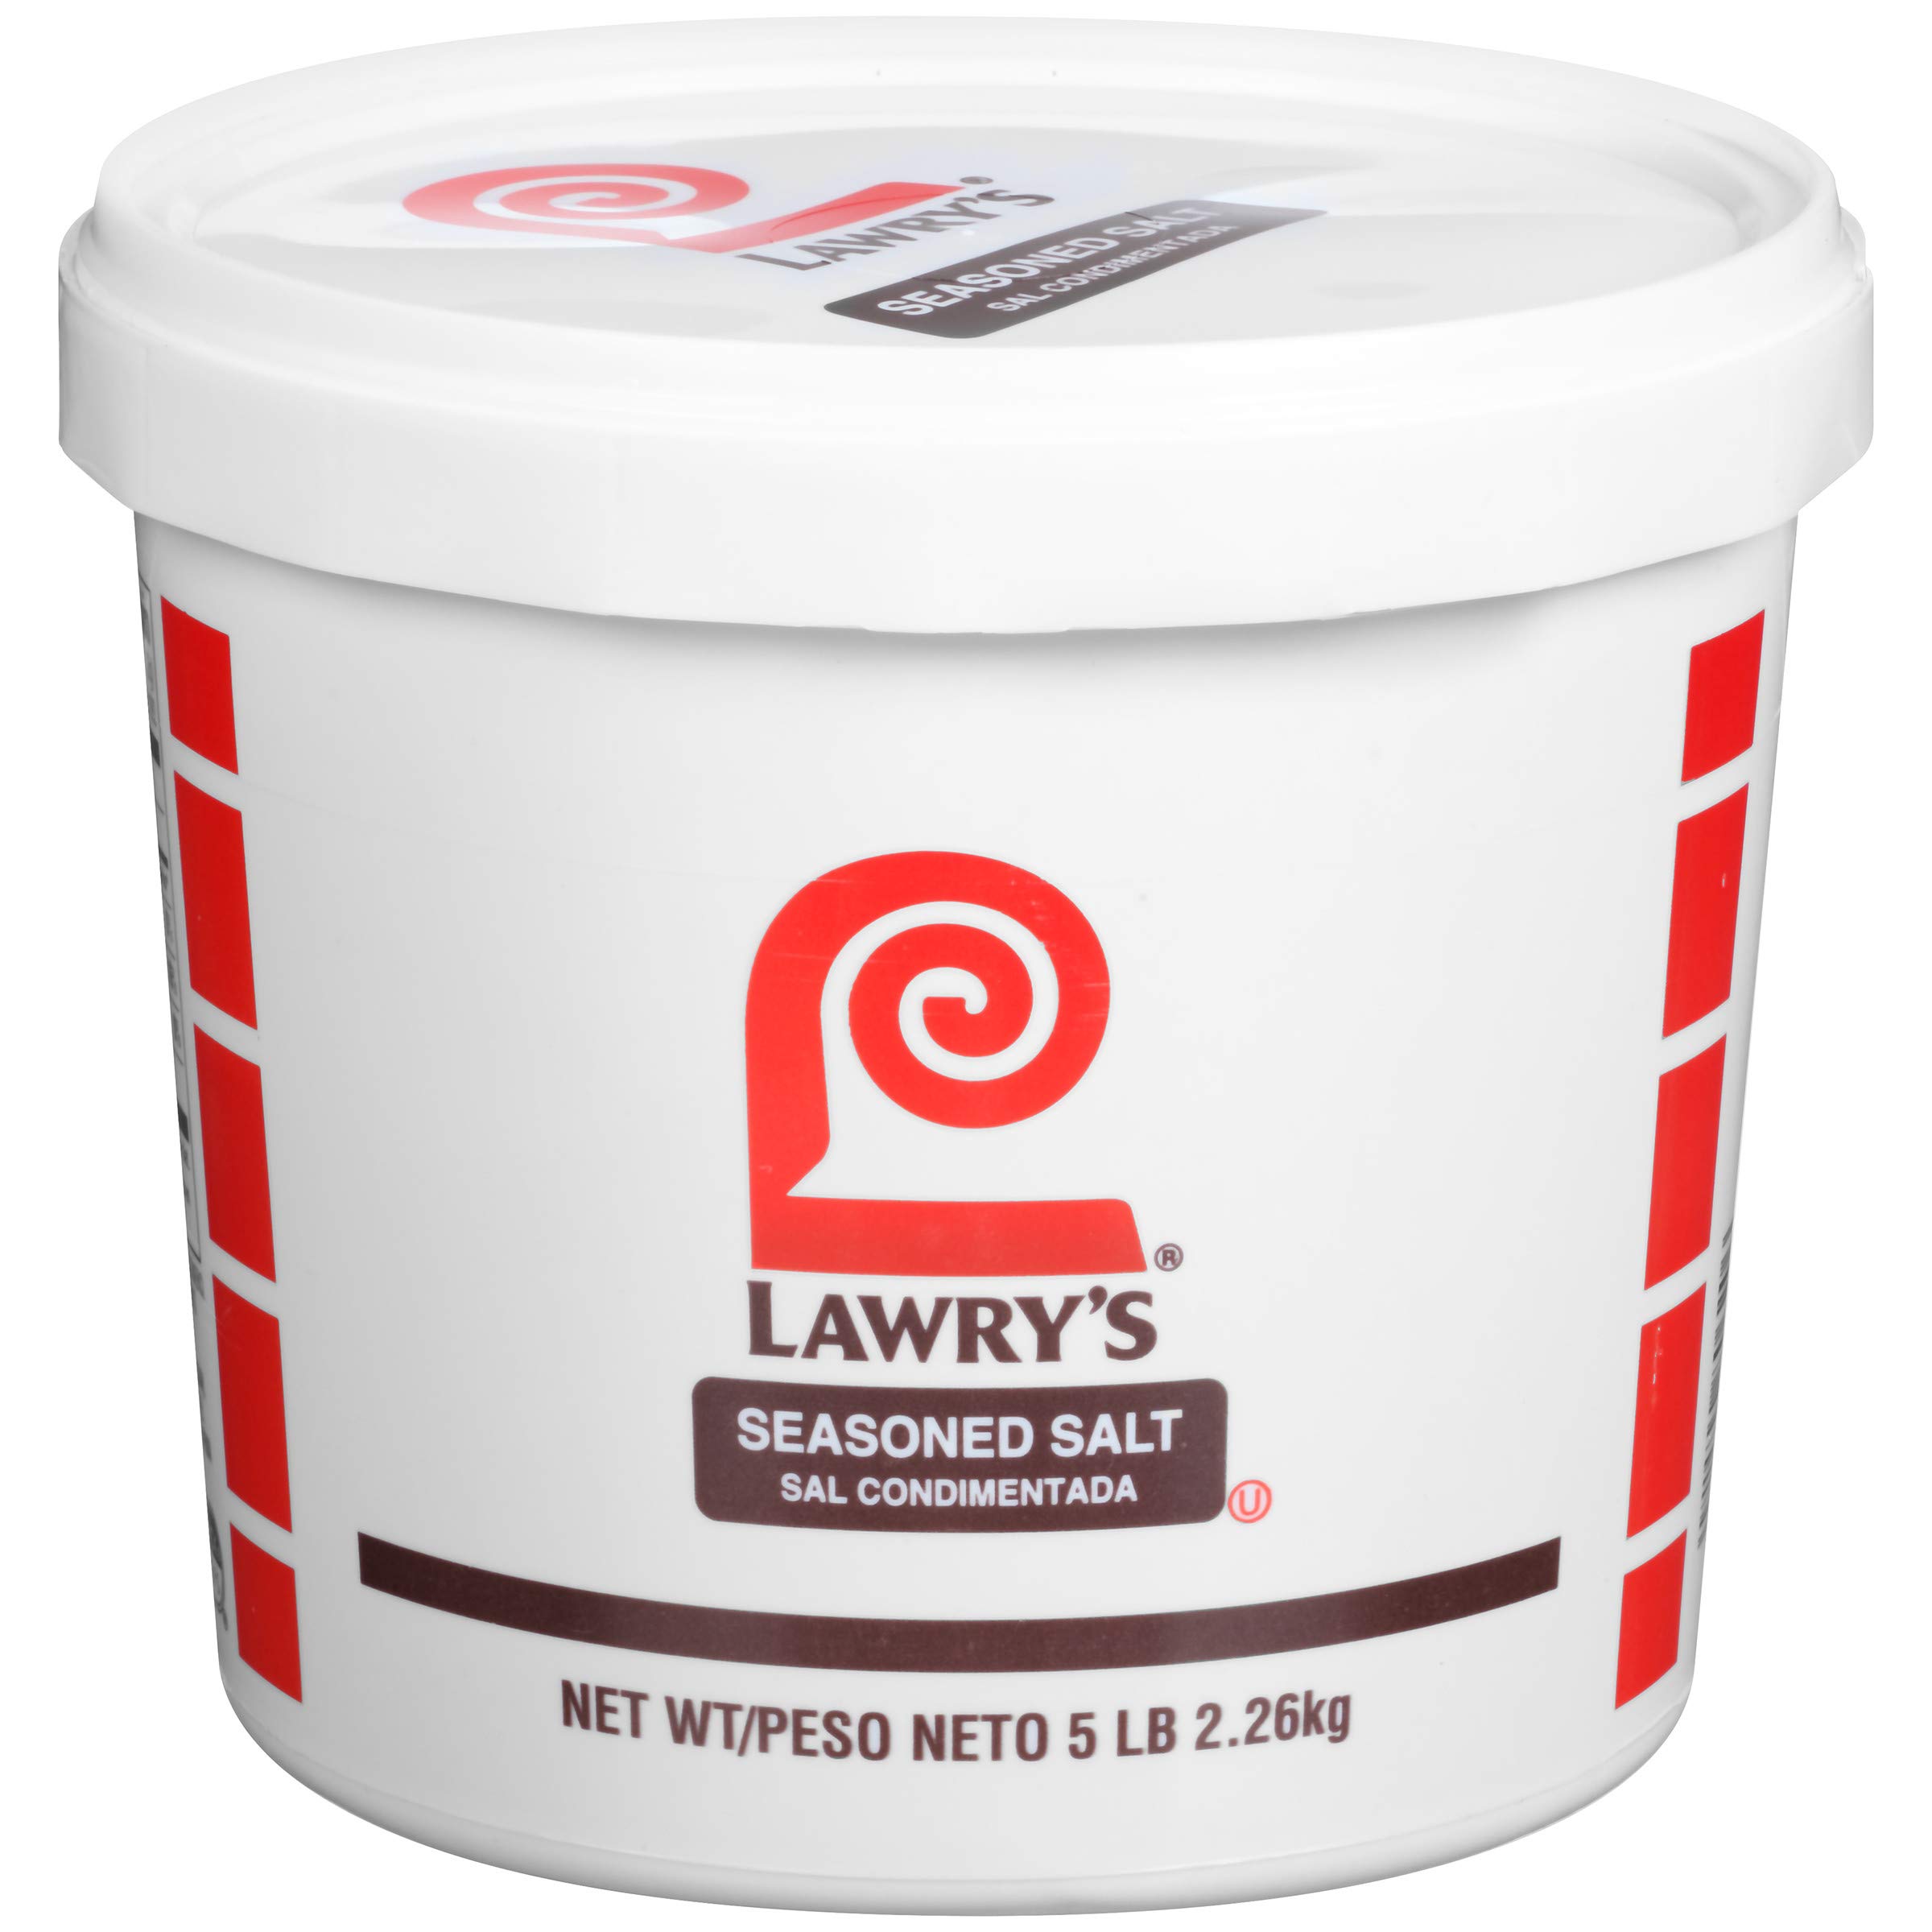 Lawry's Seasoned Salt, 5 lb - One 5 Pound Container of All-Purpose Seasoned  Salt Made With Perfect Blend of Salt, Garlic, Turmeric, Celery, Paprika and  Other Spices 5 Pound (Pack of 1)